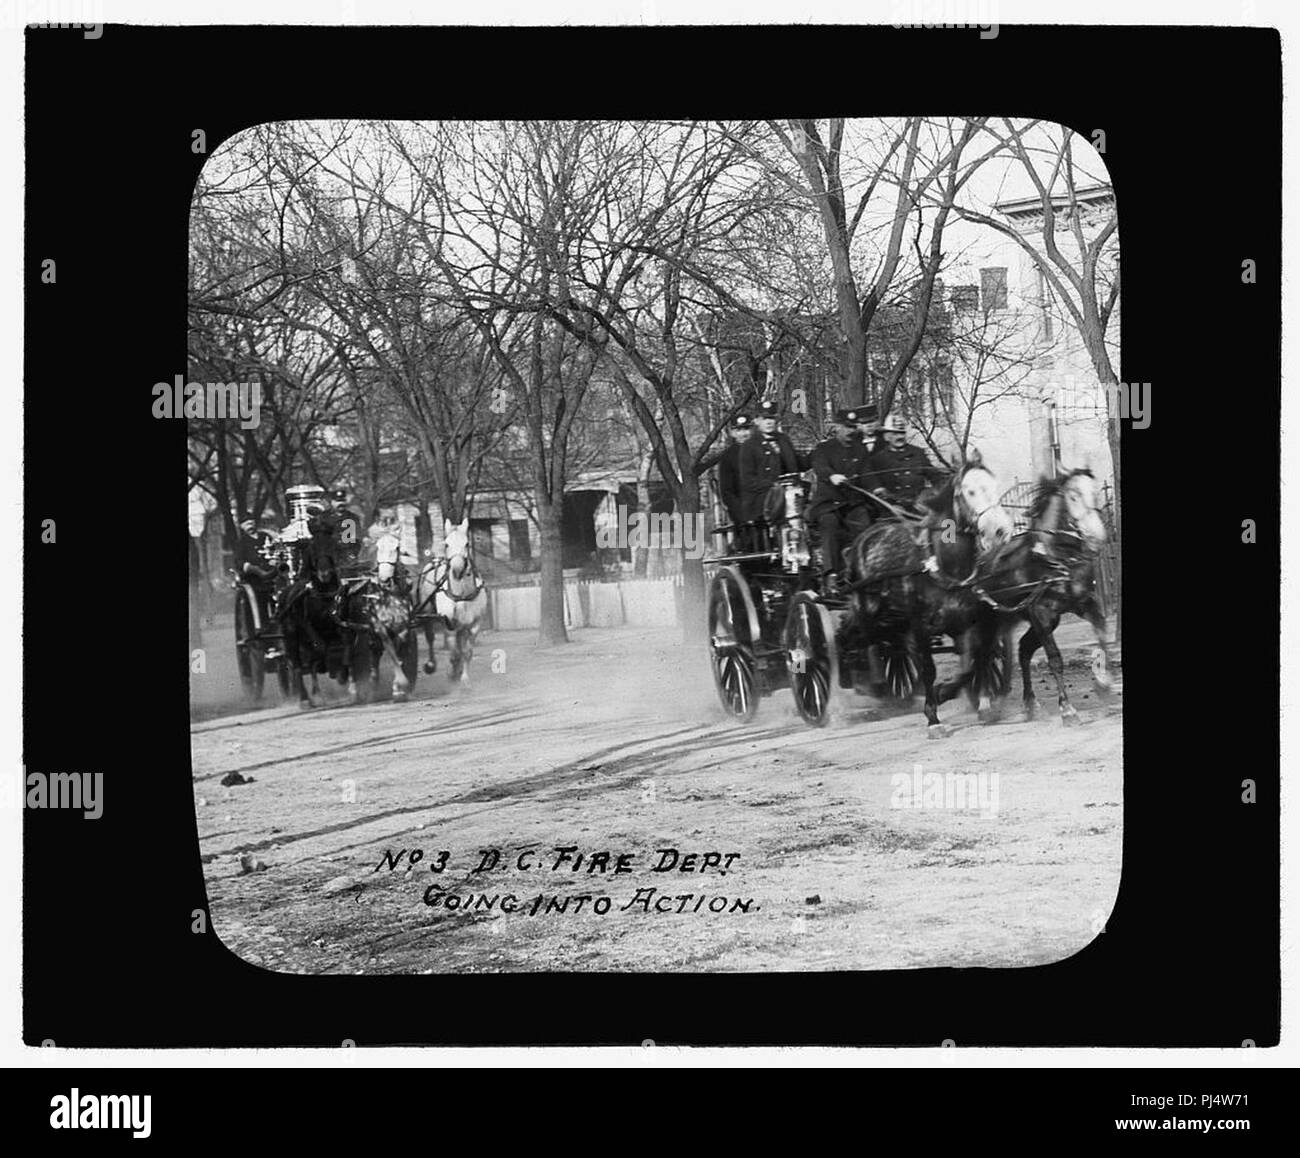 Baltimore fire, 1904) No. 3 D.C. Fire Dept. going into action Stock Photo